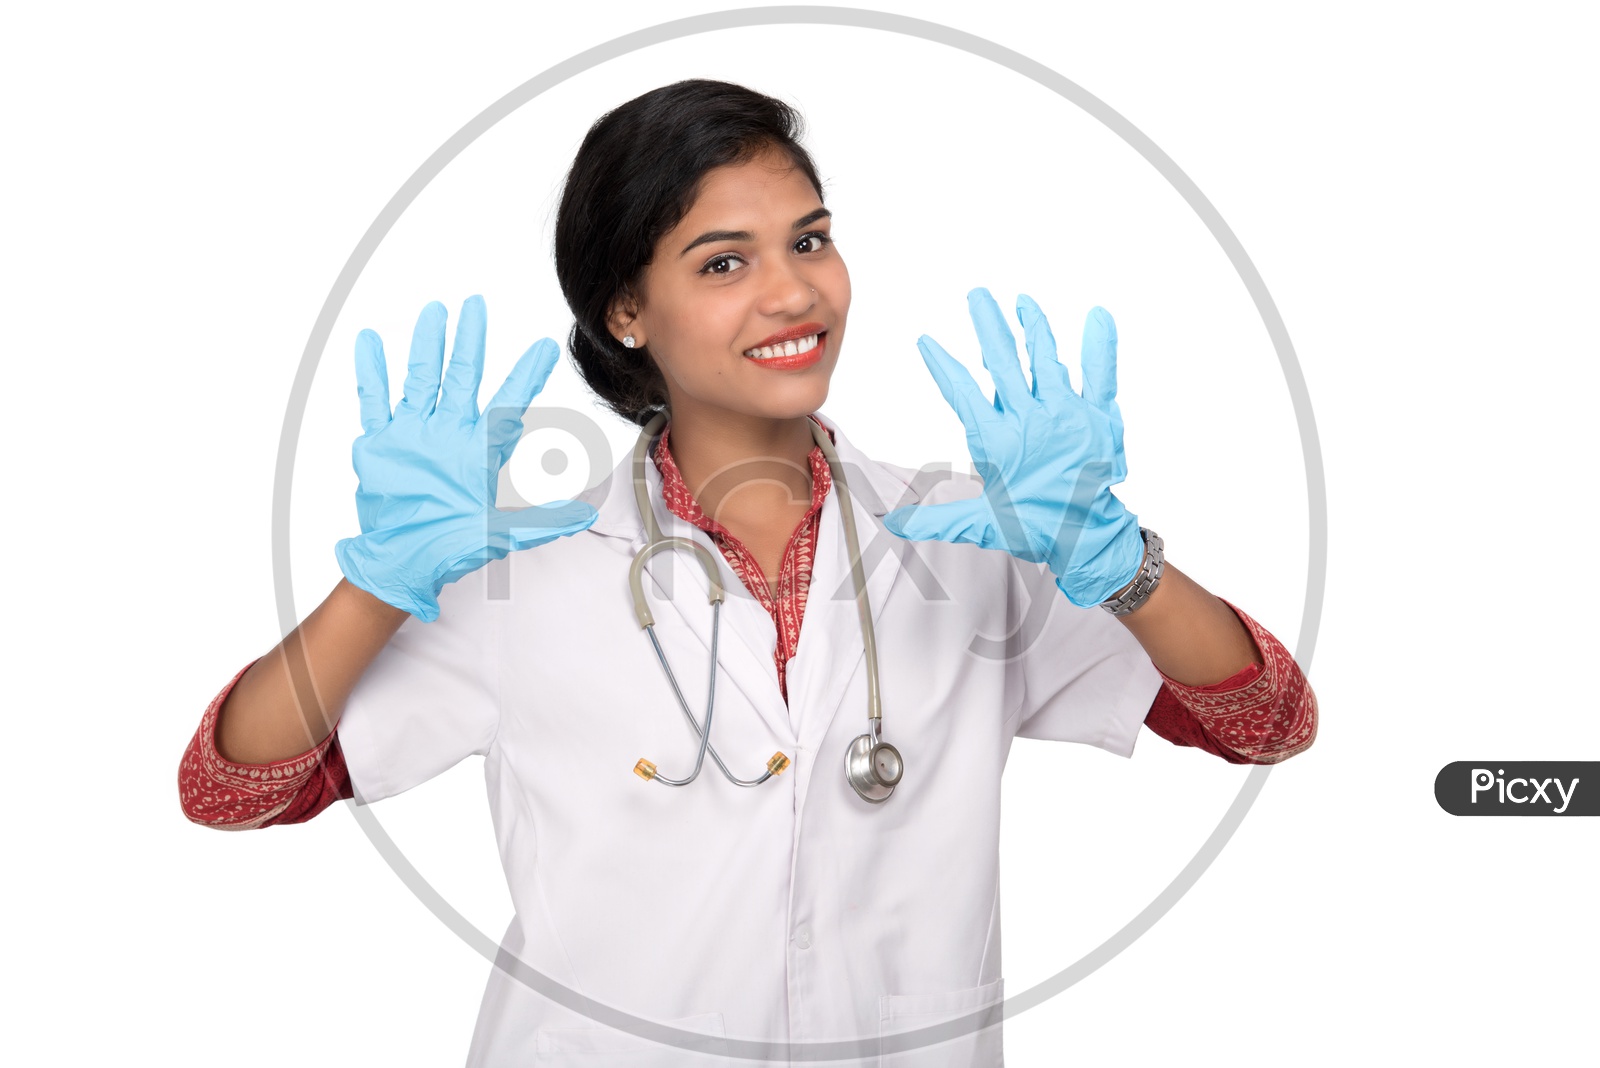 Young Lady Doctor Wearing Surgical Gloves And Posing On an Isolated White Background